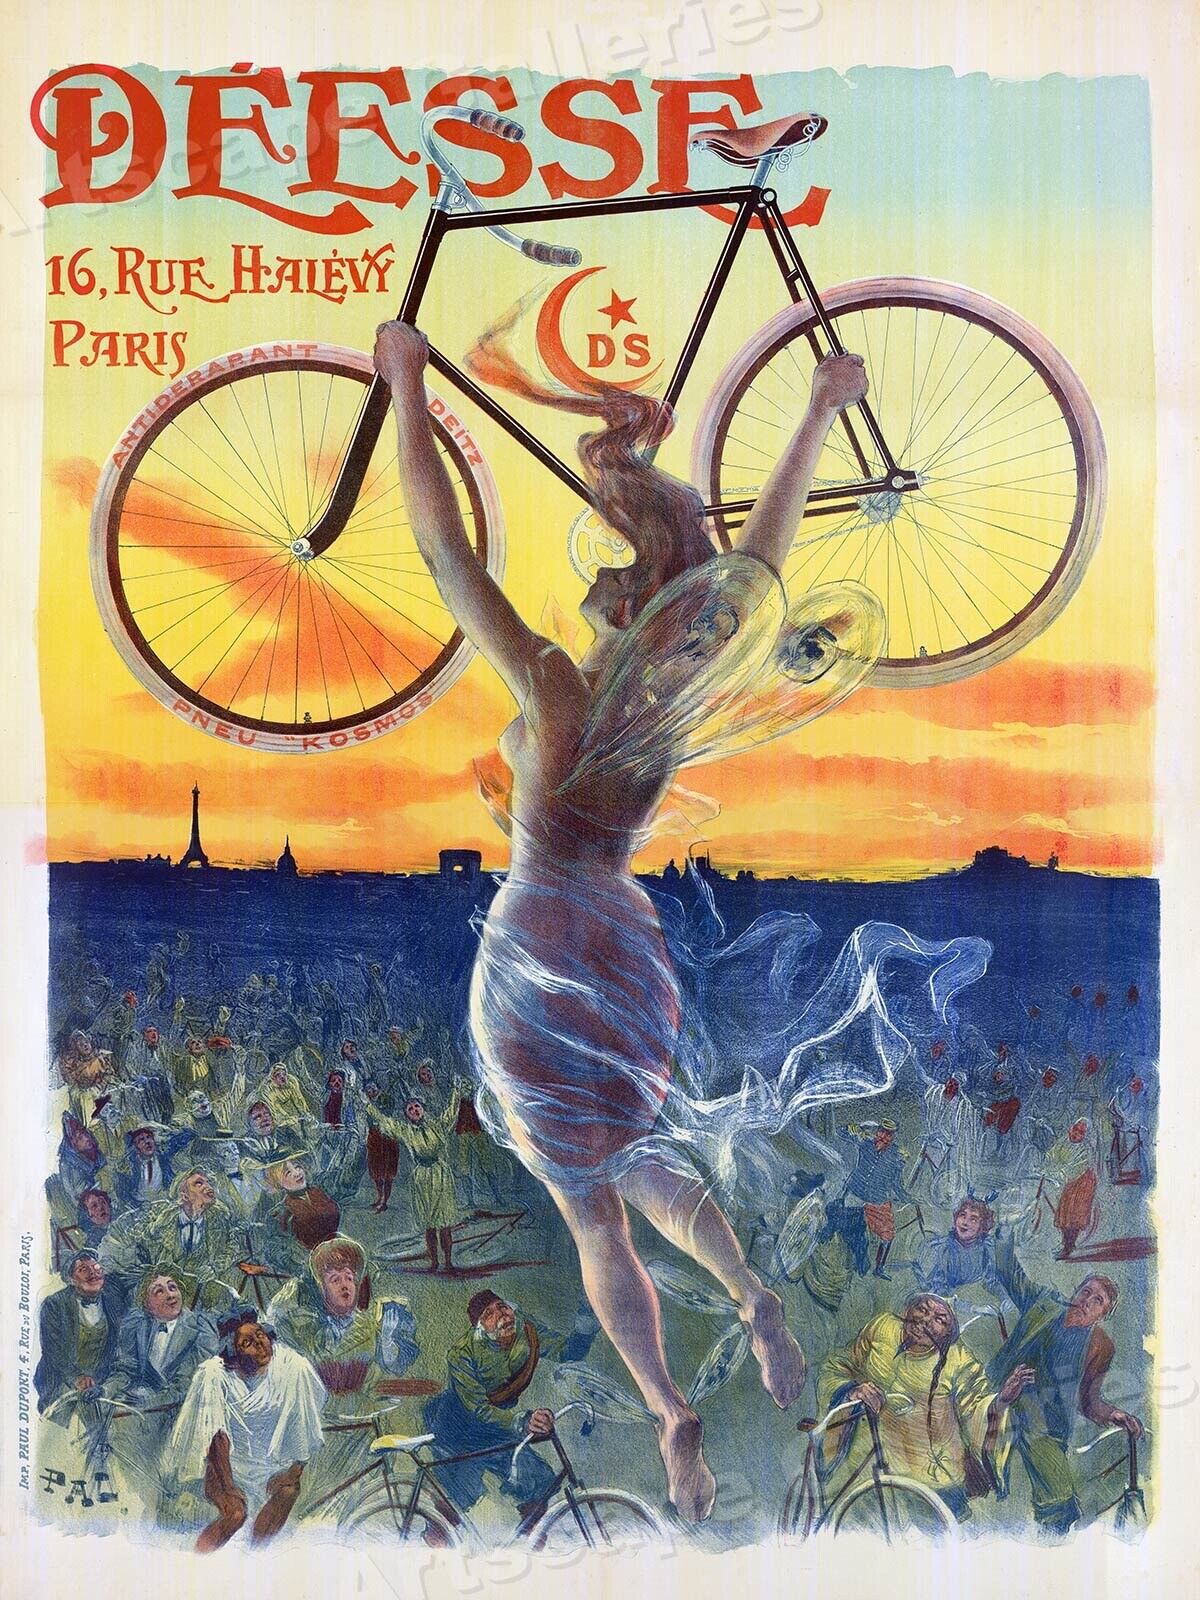 1898 Deesse Bicycle Art Nouveau Cycling Advertising Poster -  20x28